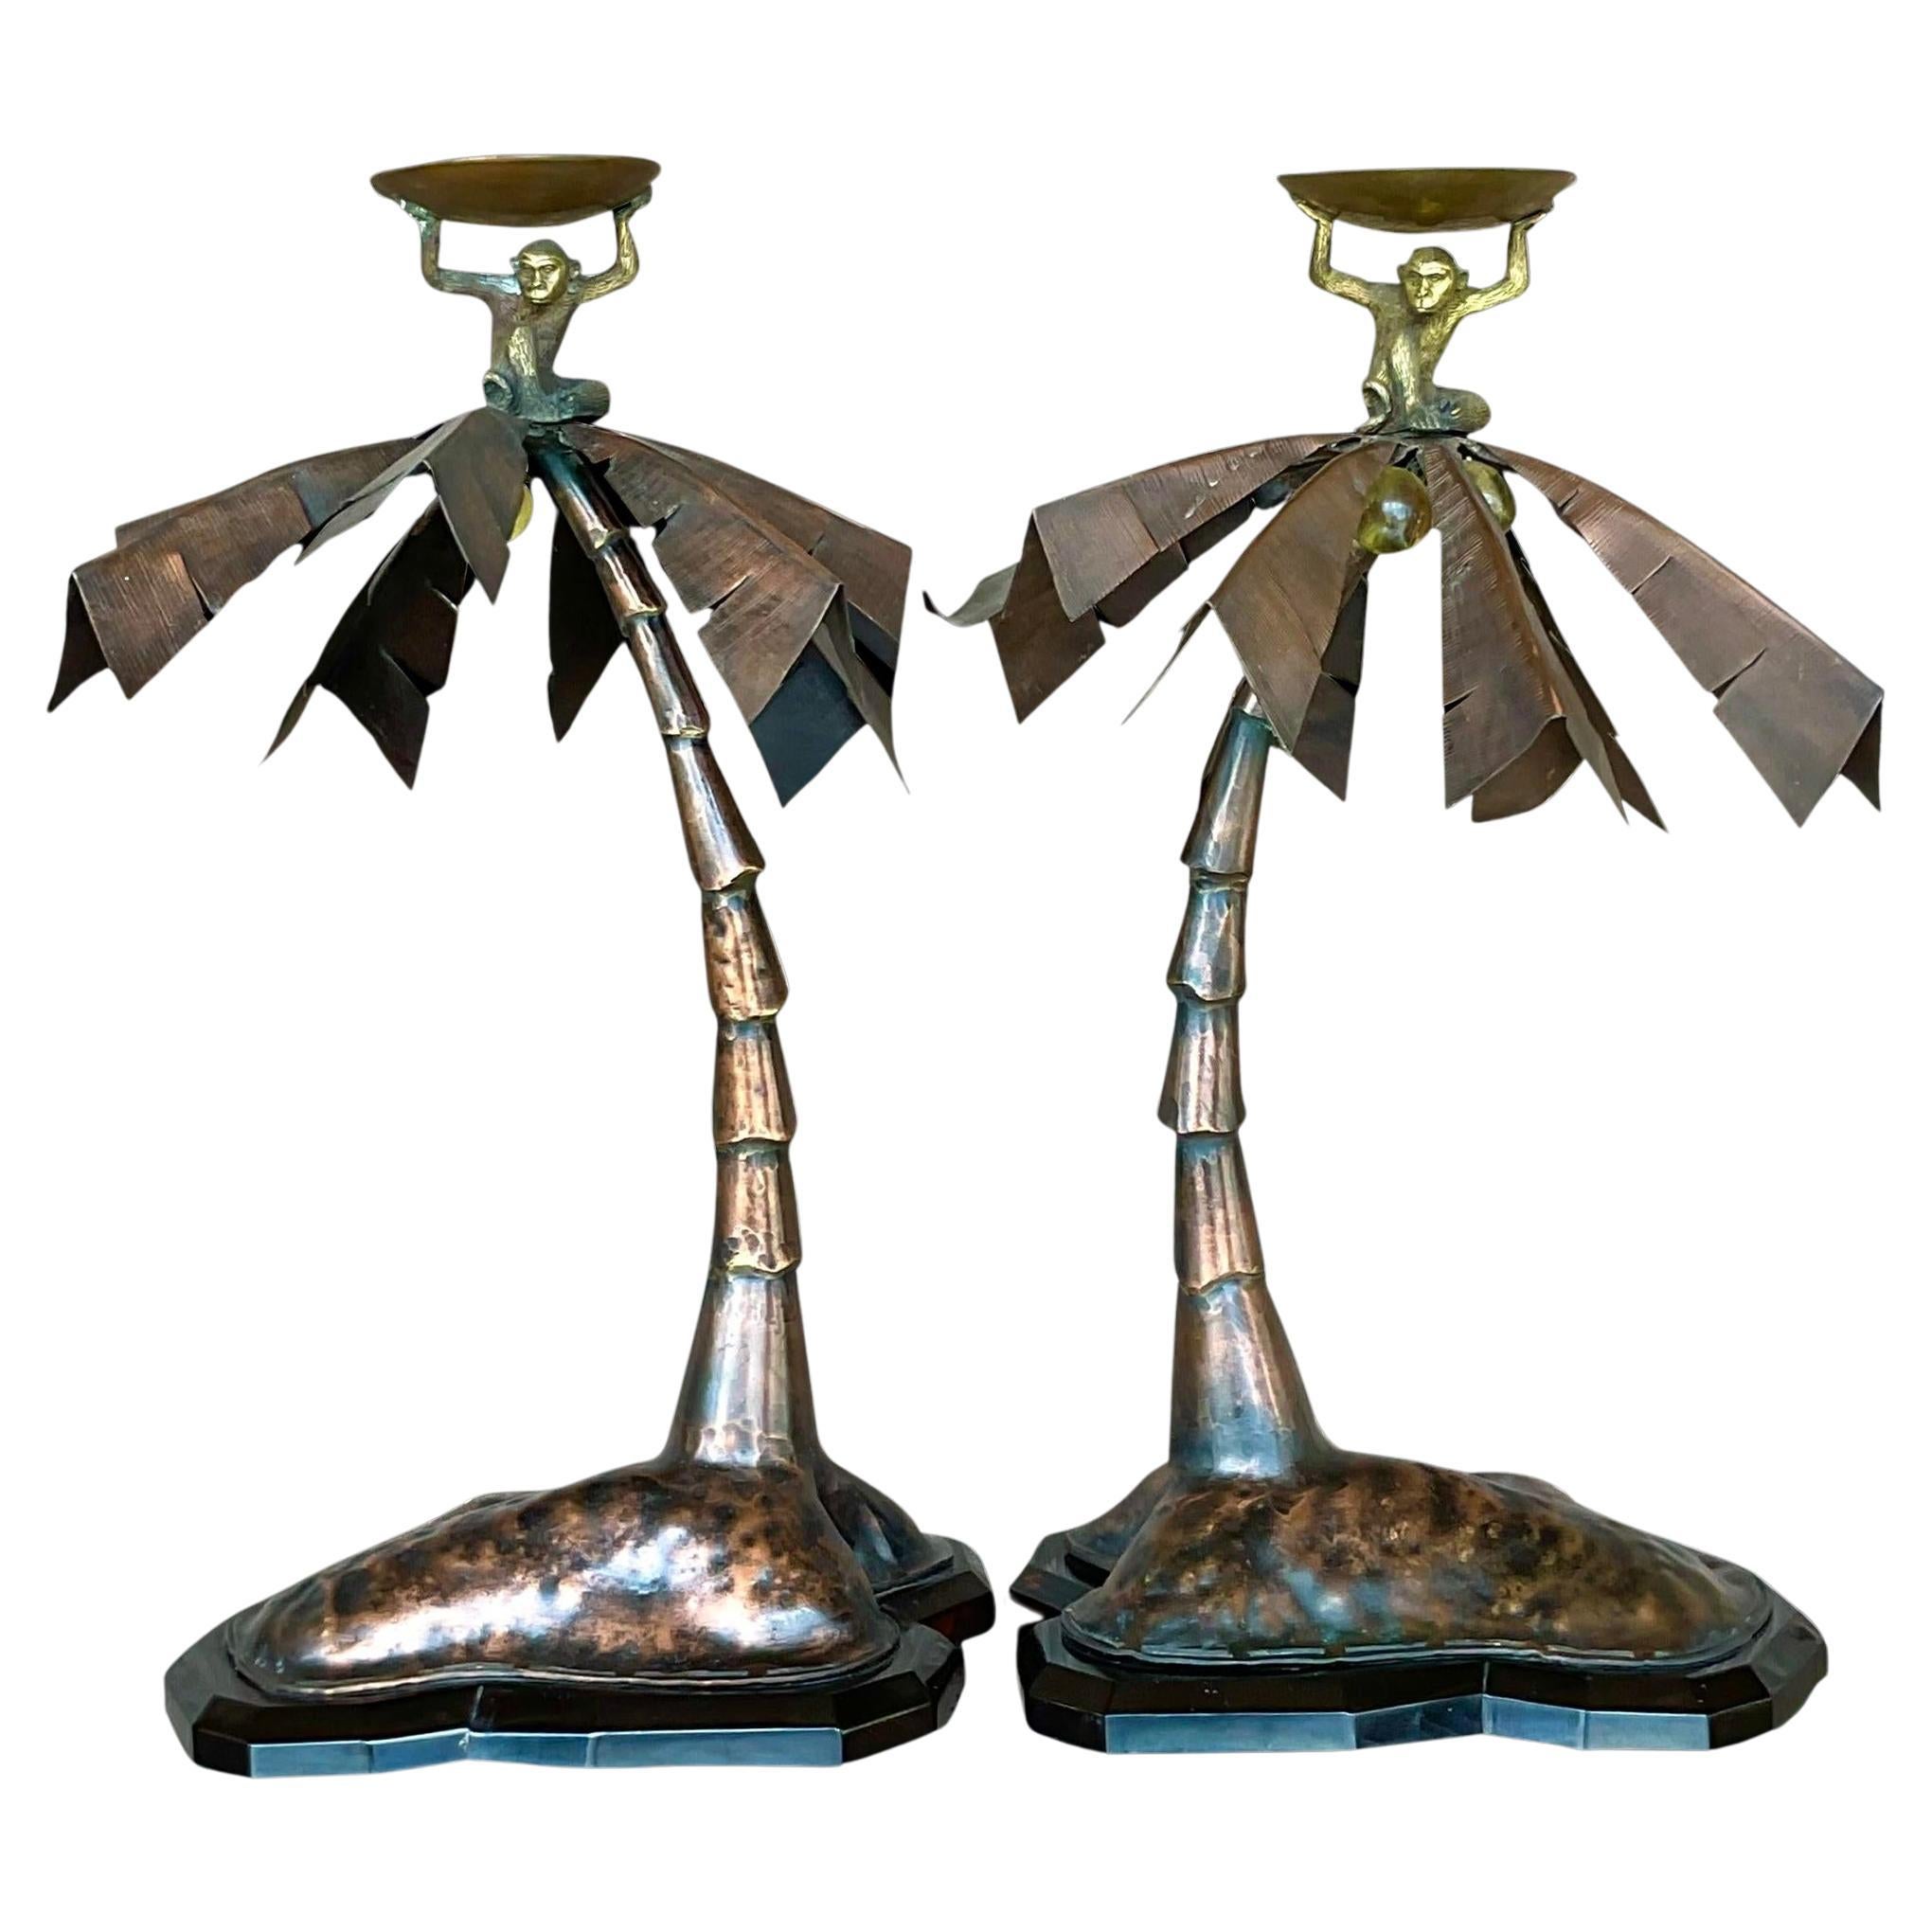 Vintage Coastal Patinated Metal Palm Tree With Monkey Candlesticks - a Pair For Sale